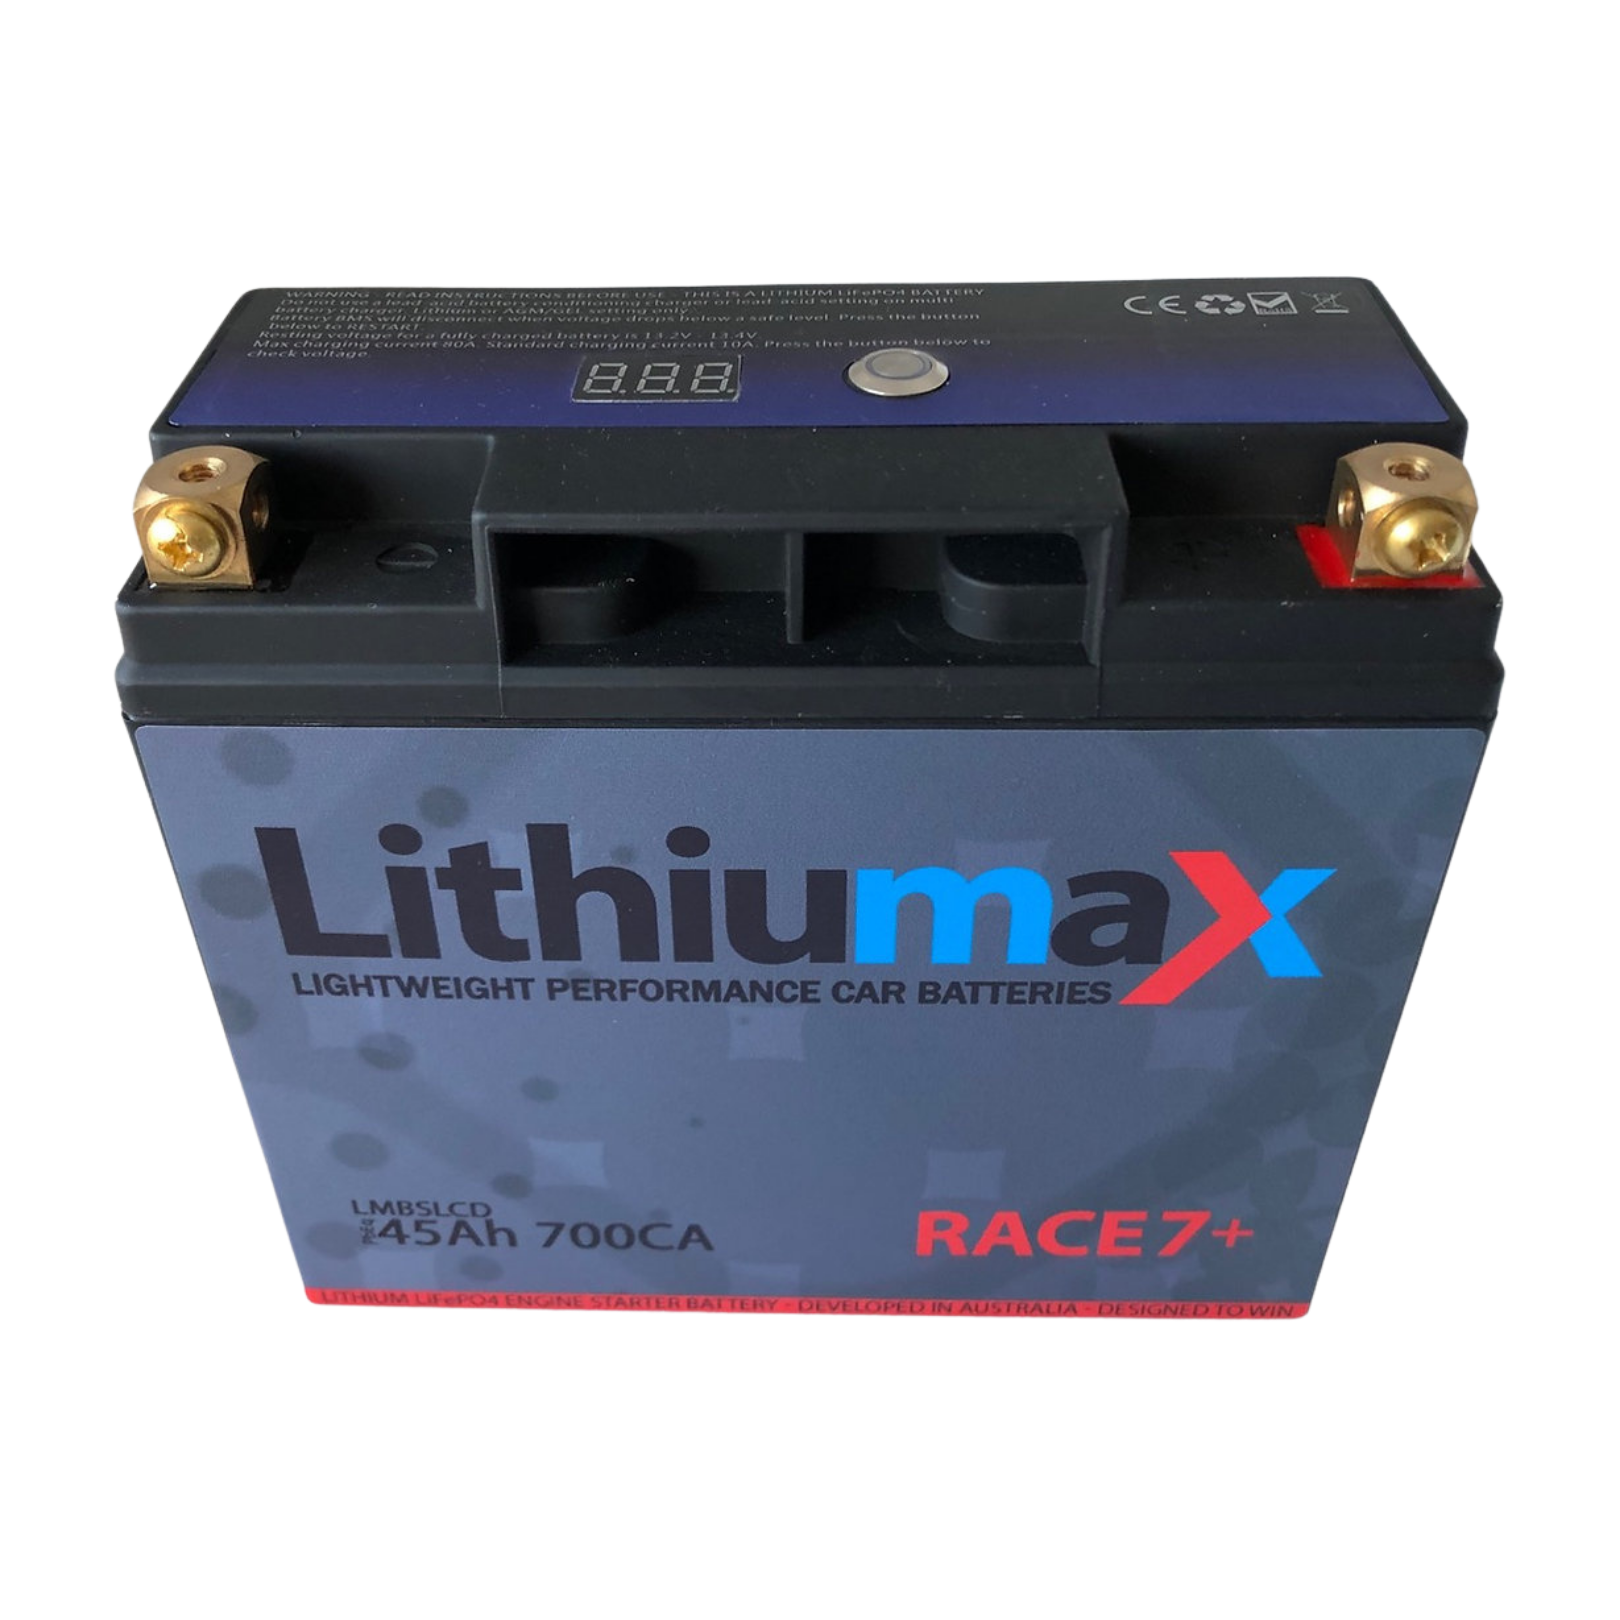 Lithiumax RACE7+ LCD 700CA ULTRA-LITE Engine Battery